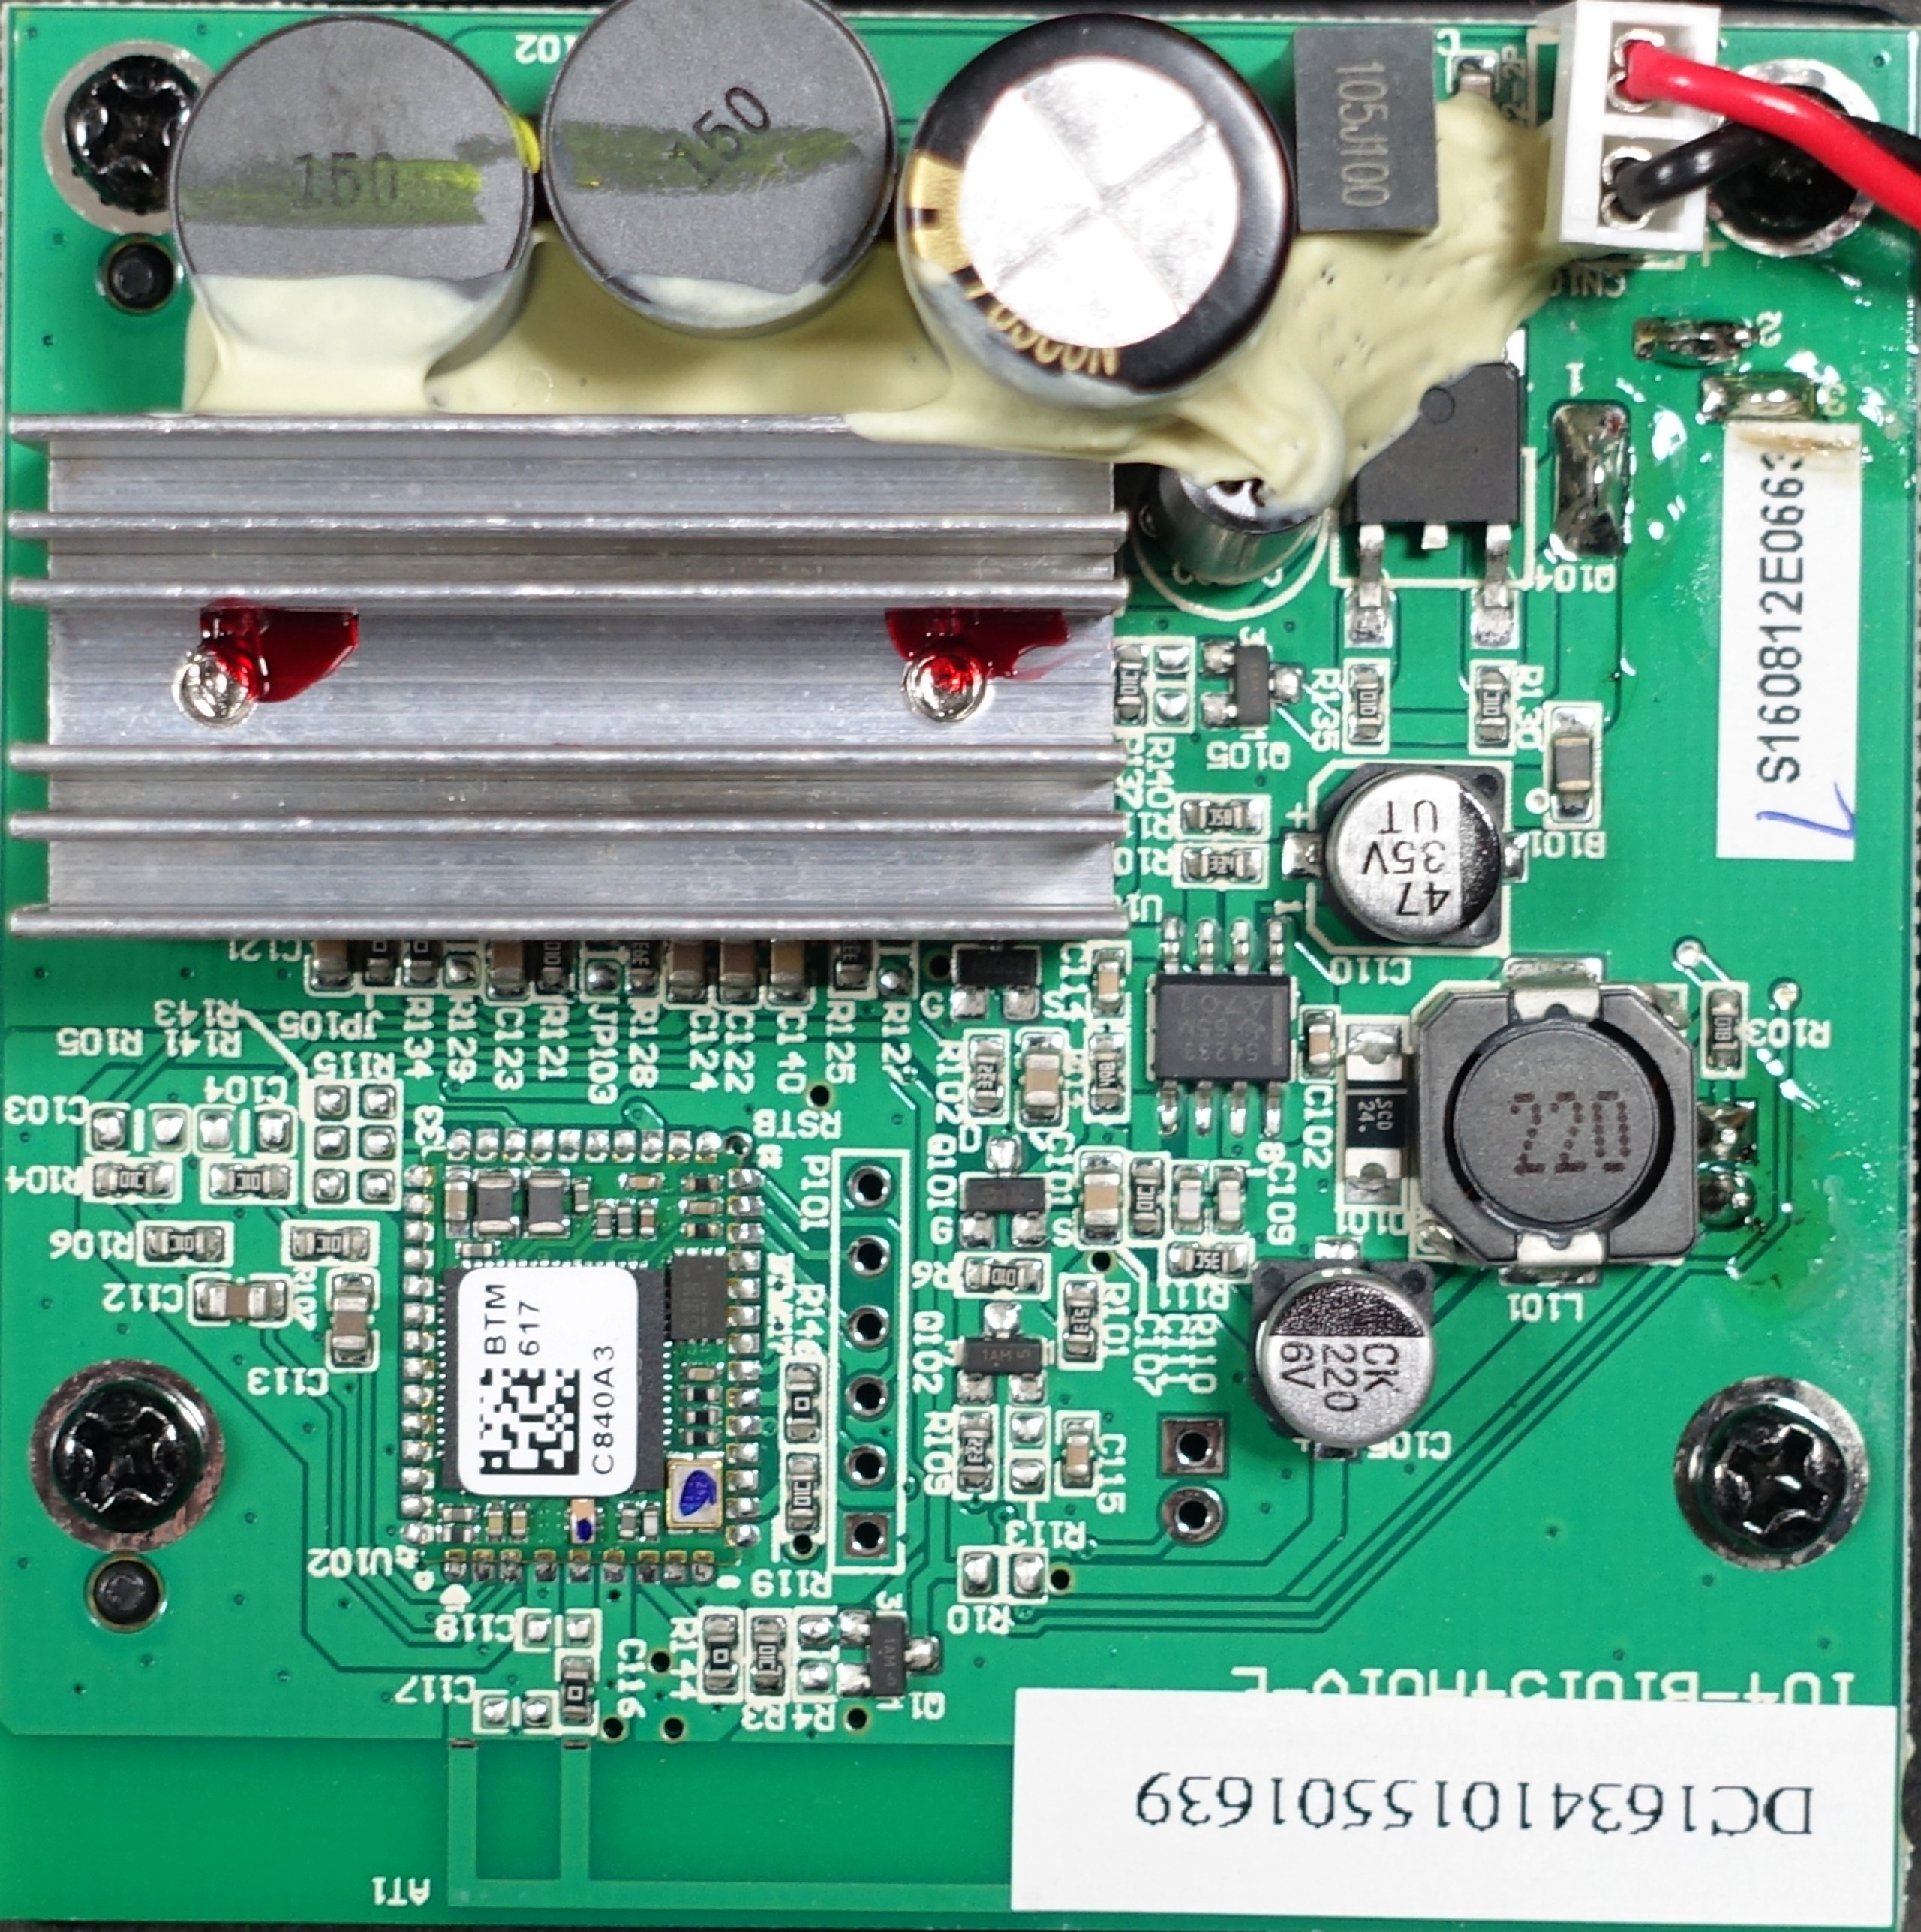 Amplifier board of the subwoofer